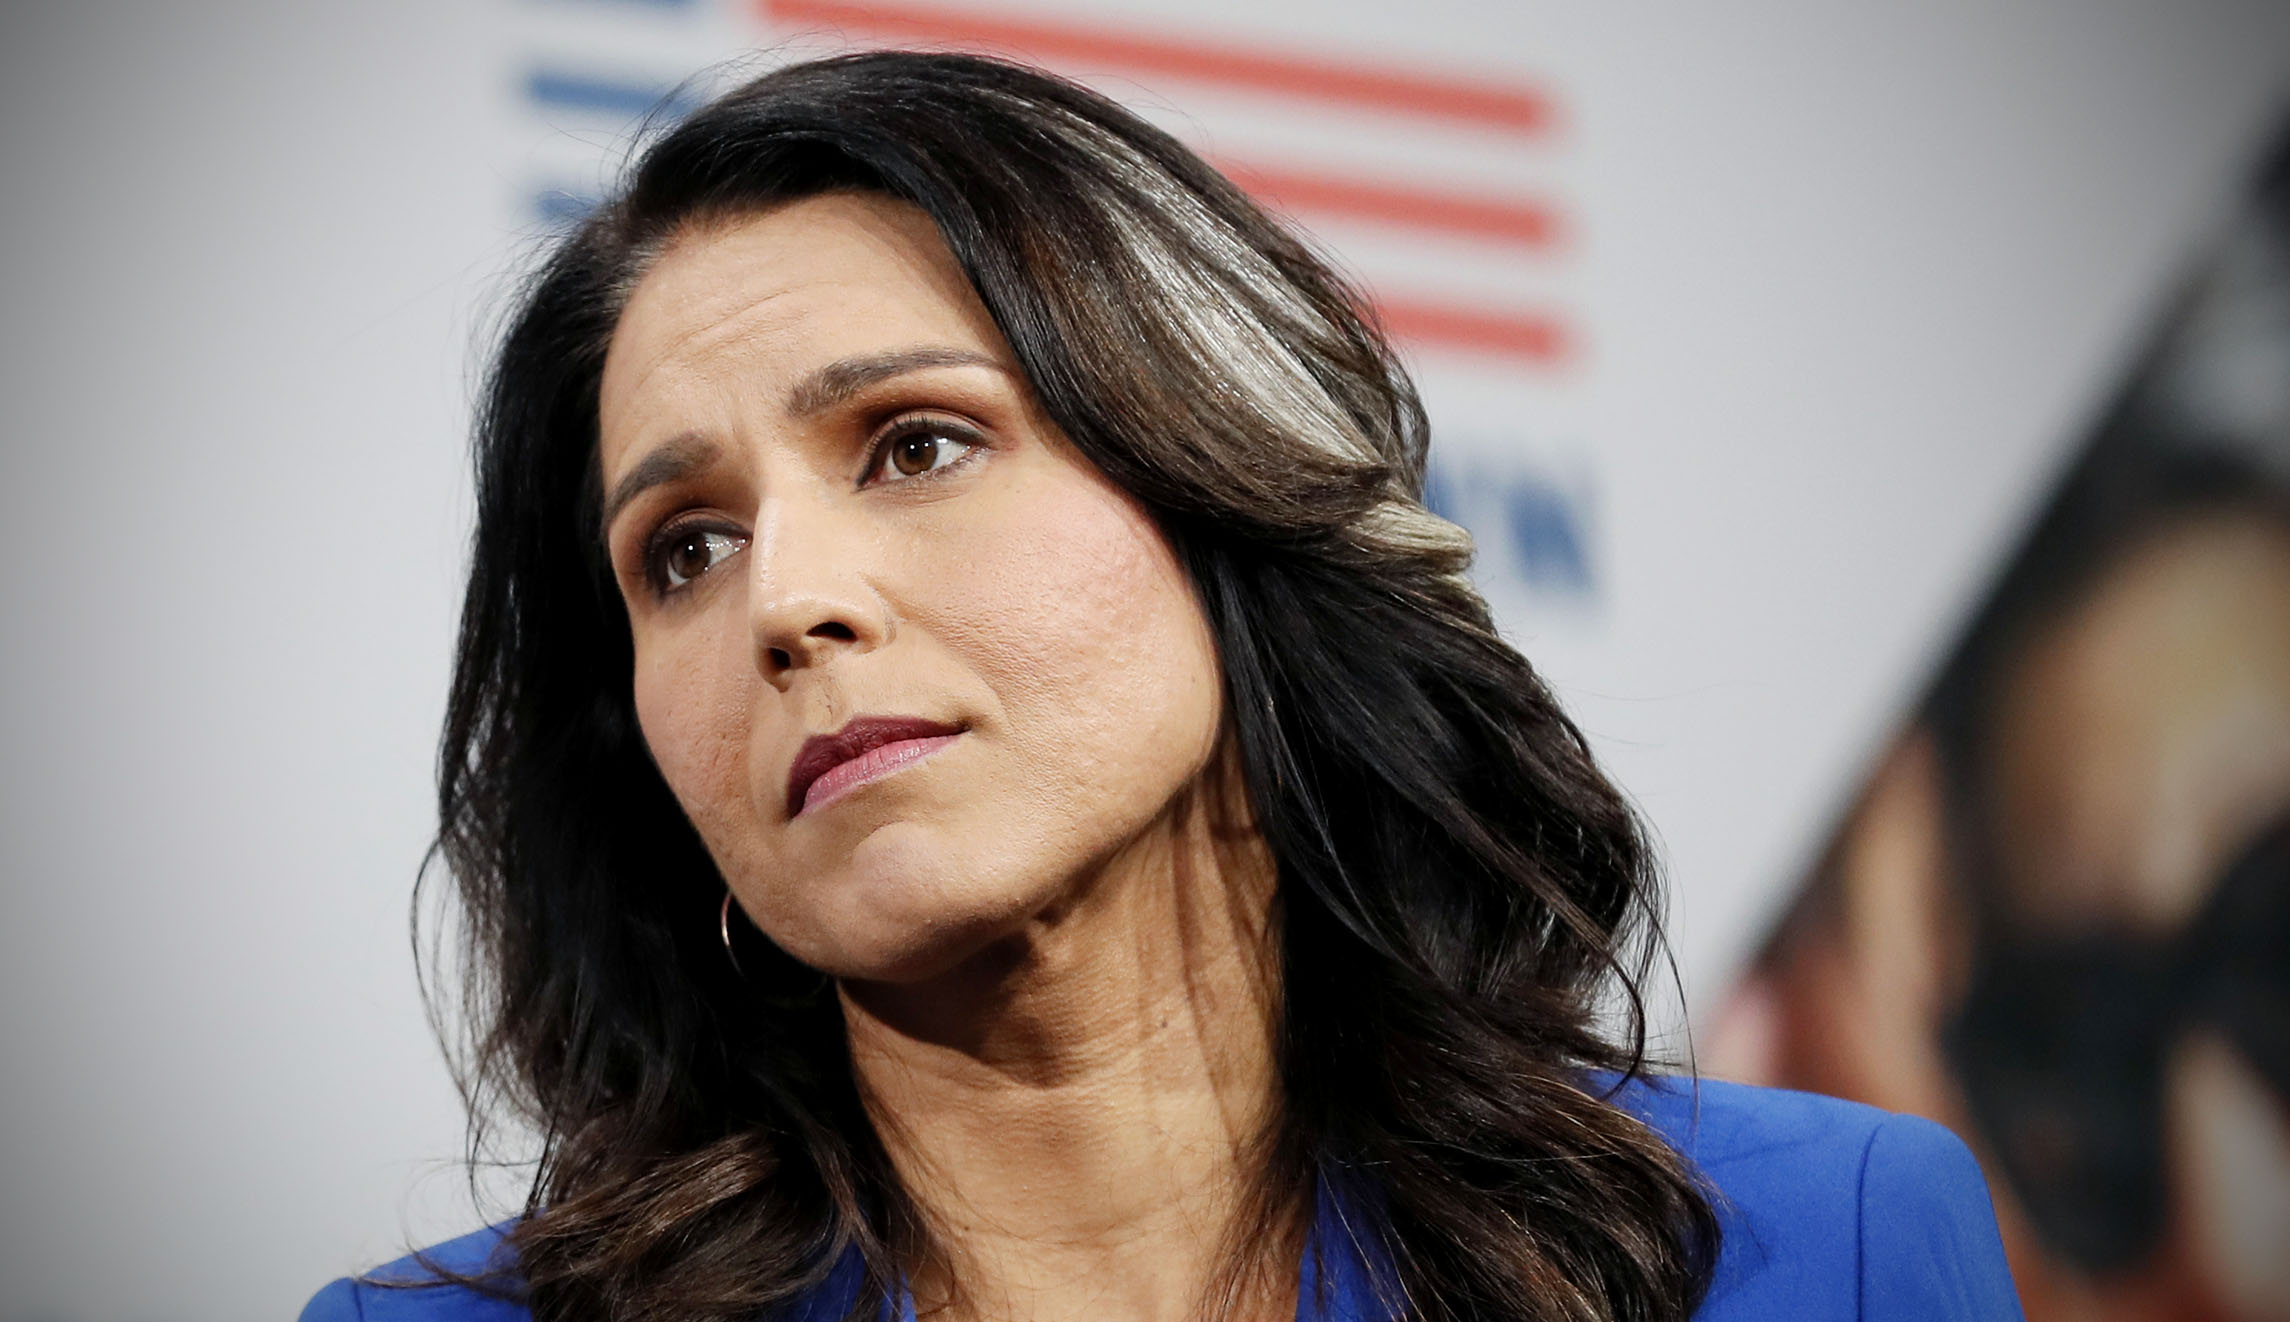 Democratic presidential candidate Rep. Tulsi Gabbard appears at an event.